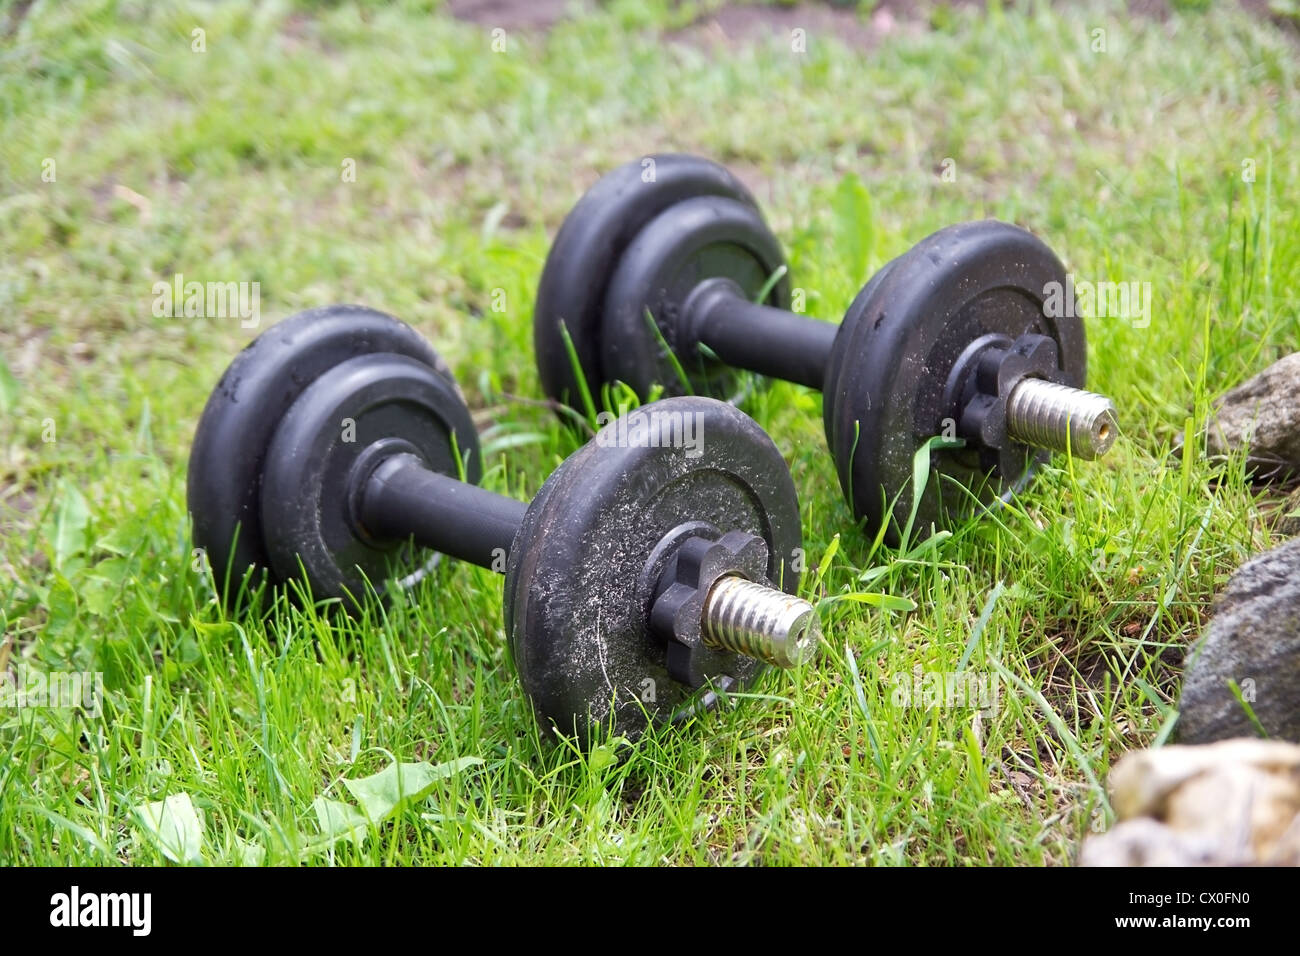 Fitness Exercise Equipment Dumbbell Weight Stock Photo Alamy